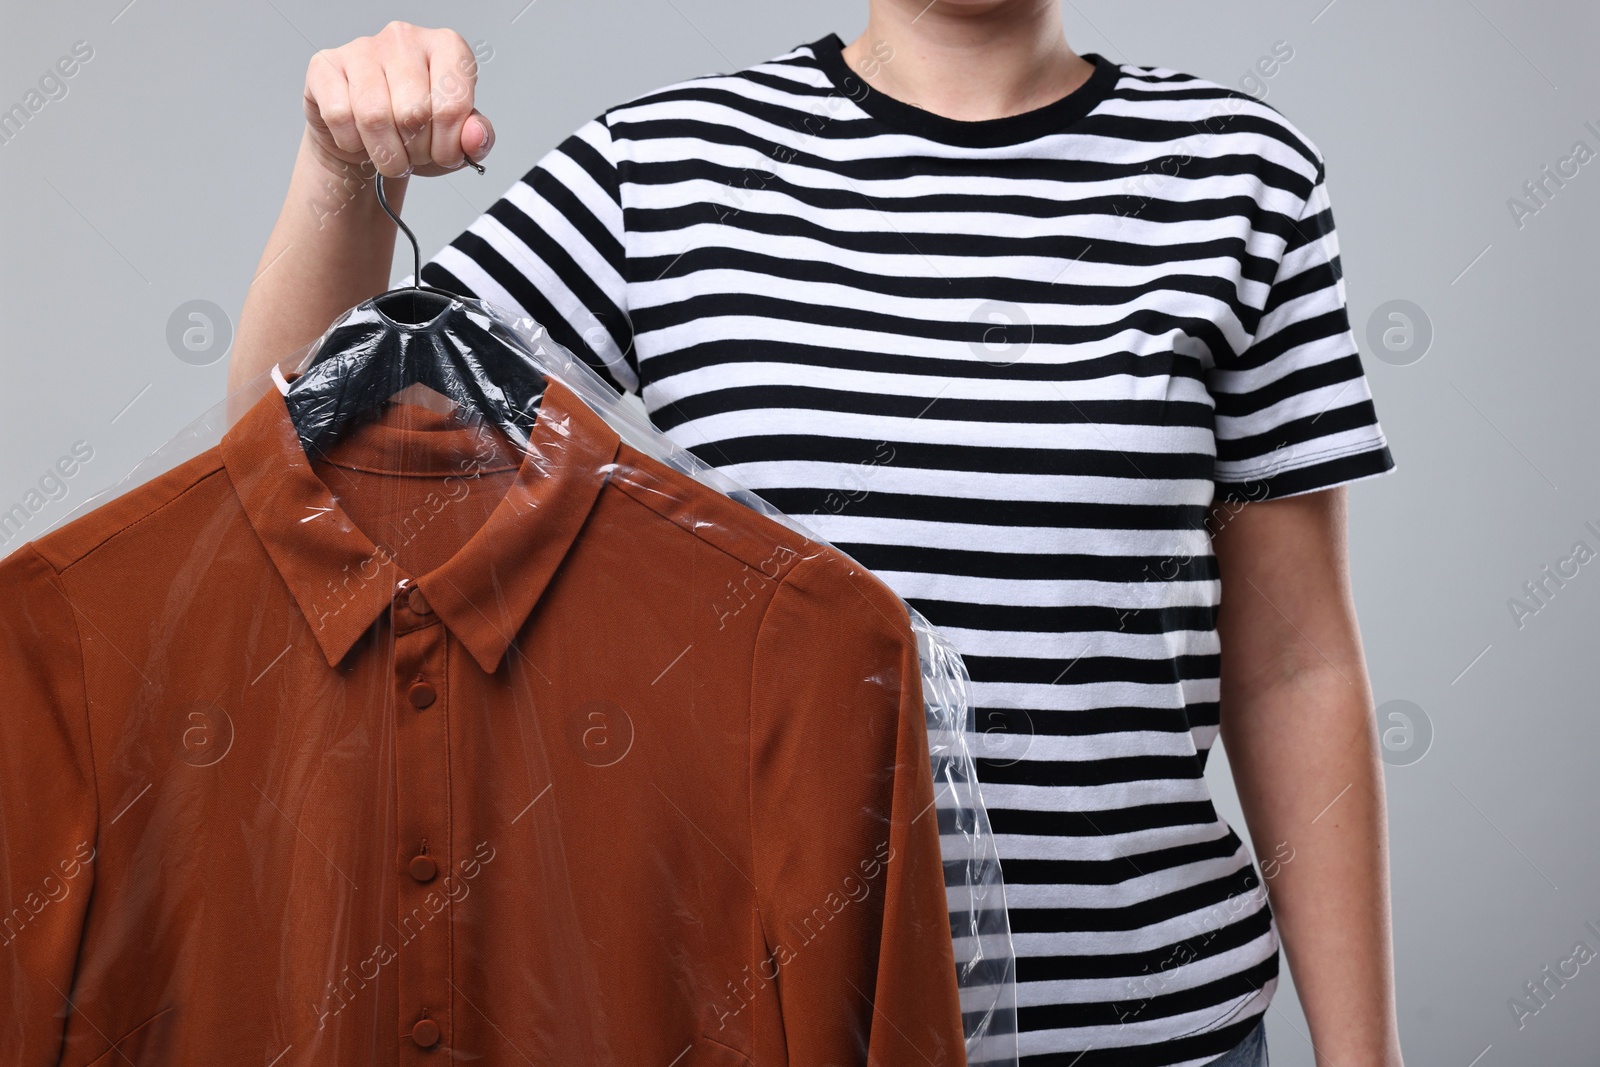 Photo of Dry-cleaning service. Woman holding shirt in plastic bag on gray background, closeup